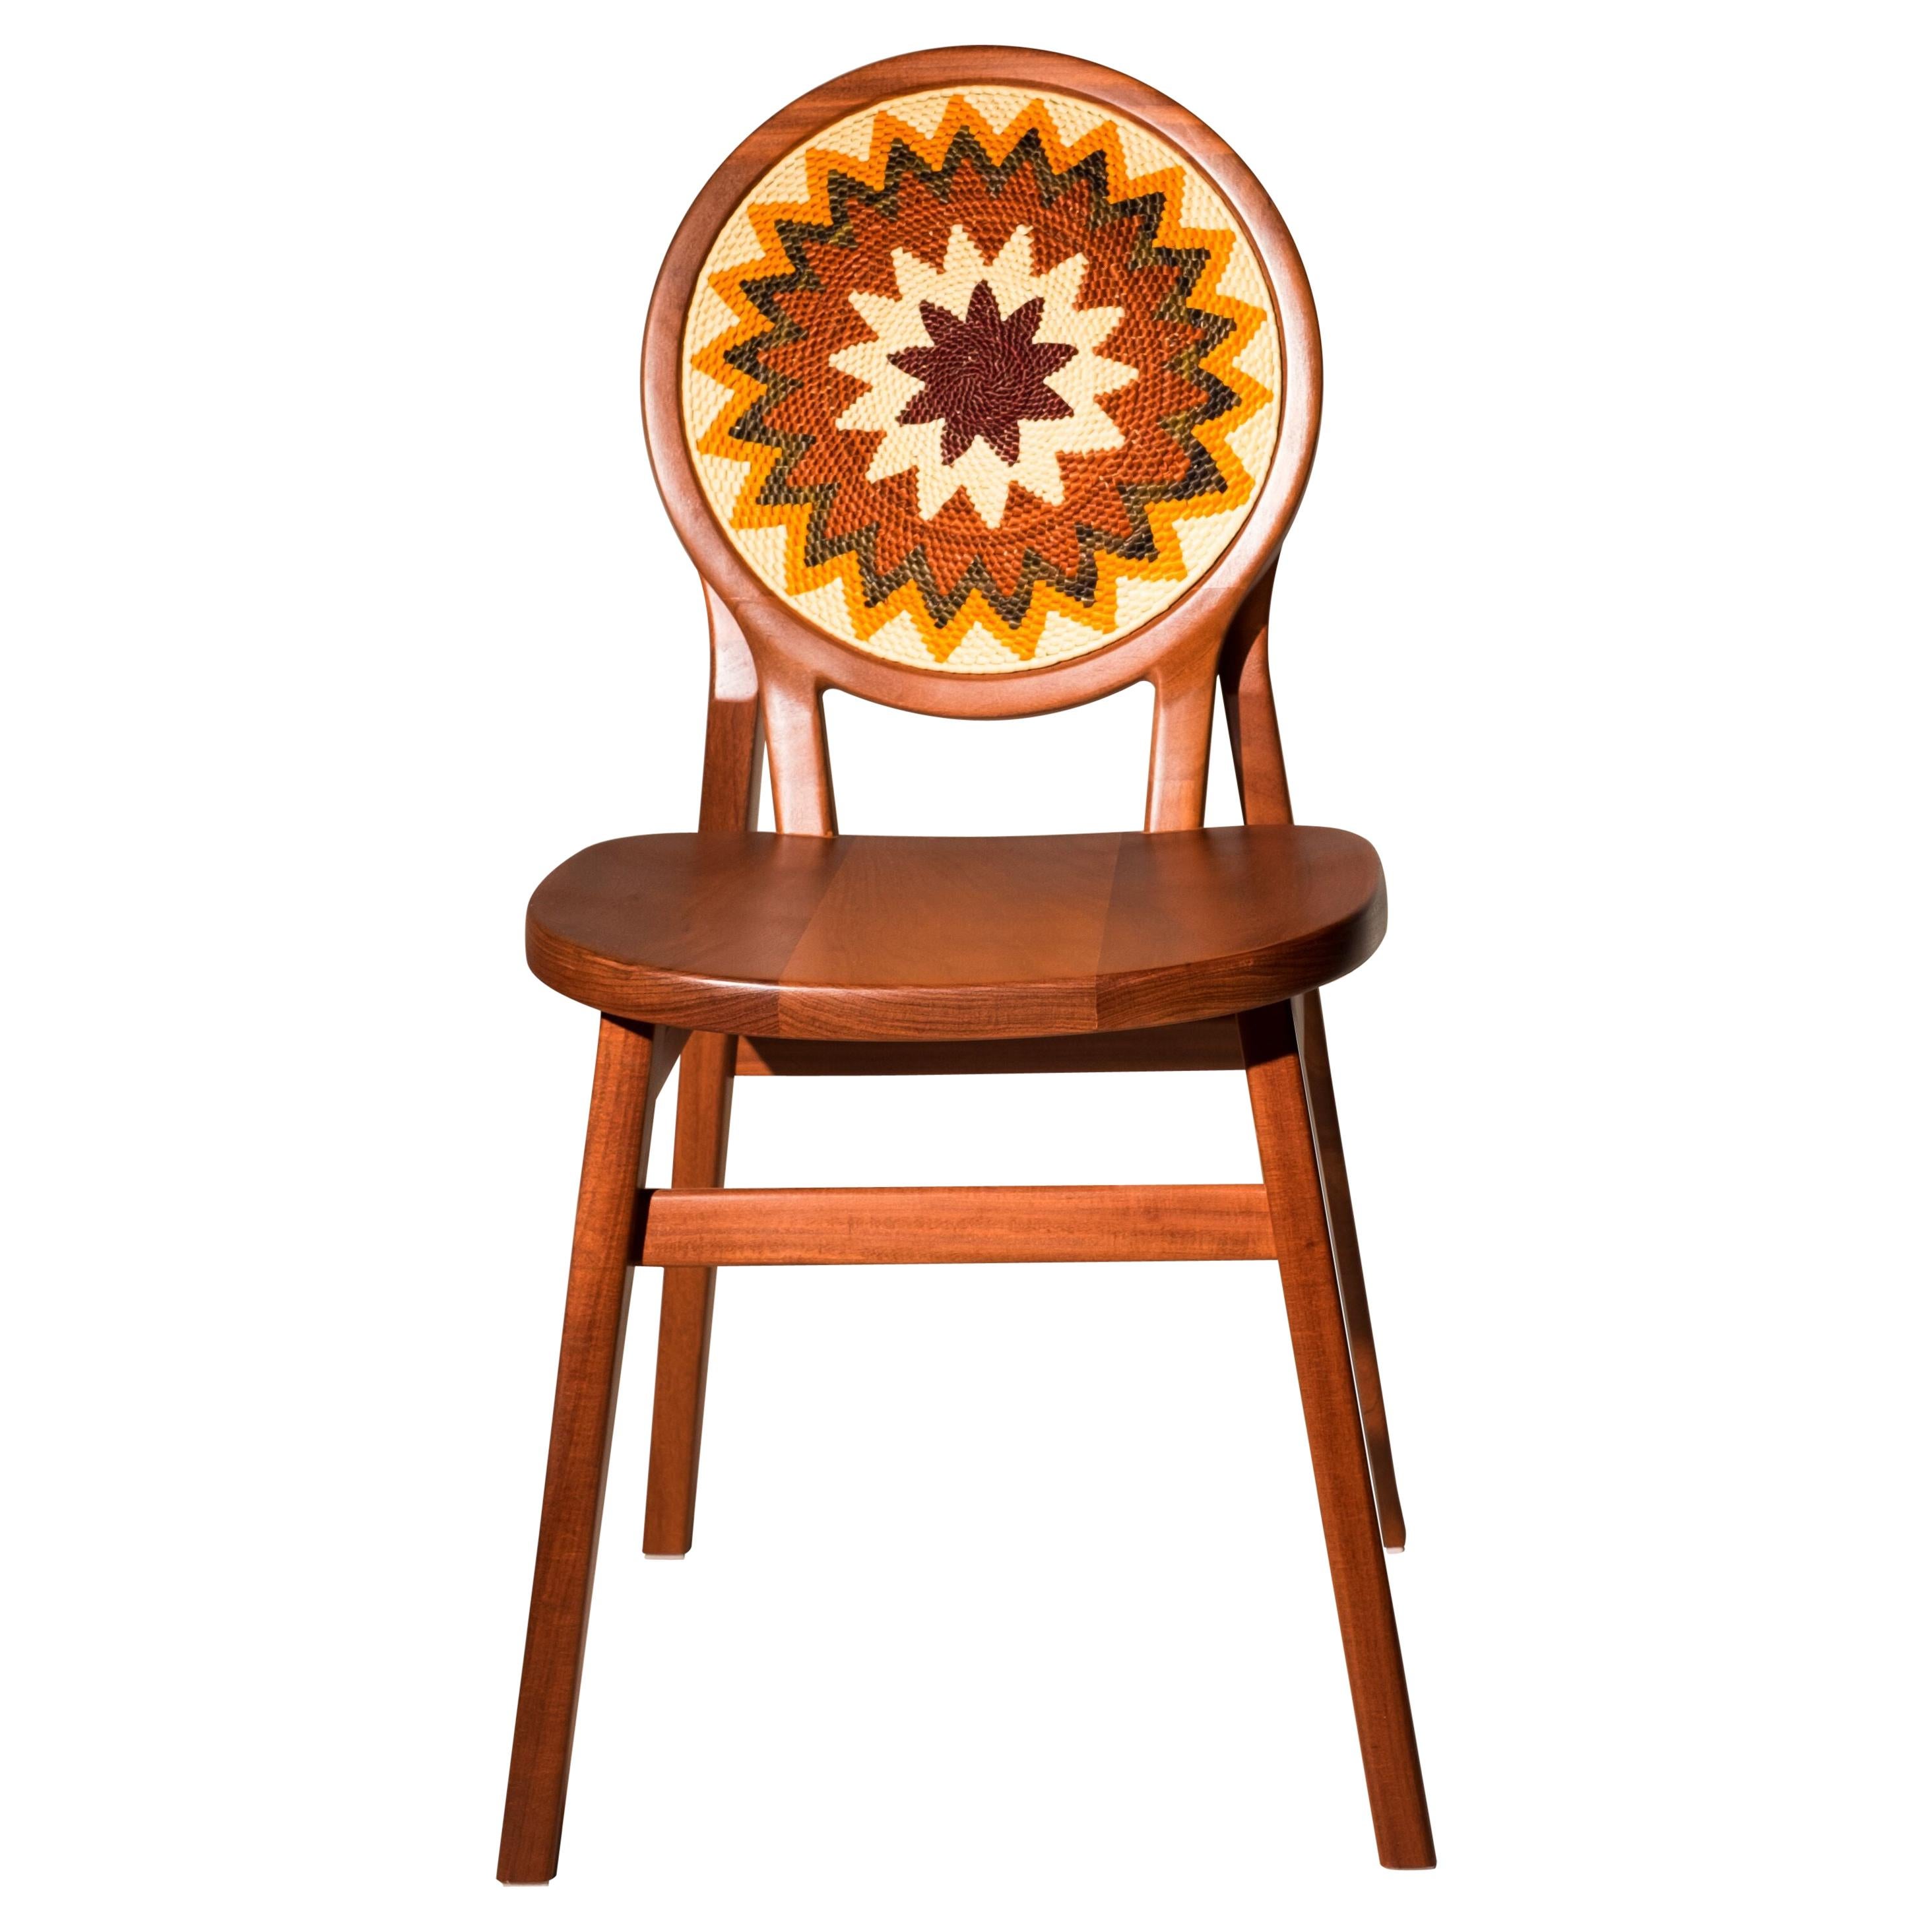 Cocar Chair, without headdress in Cabreúva wood - With artisans from Brazil